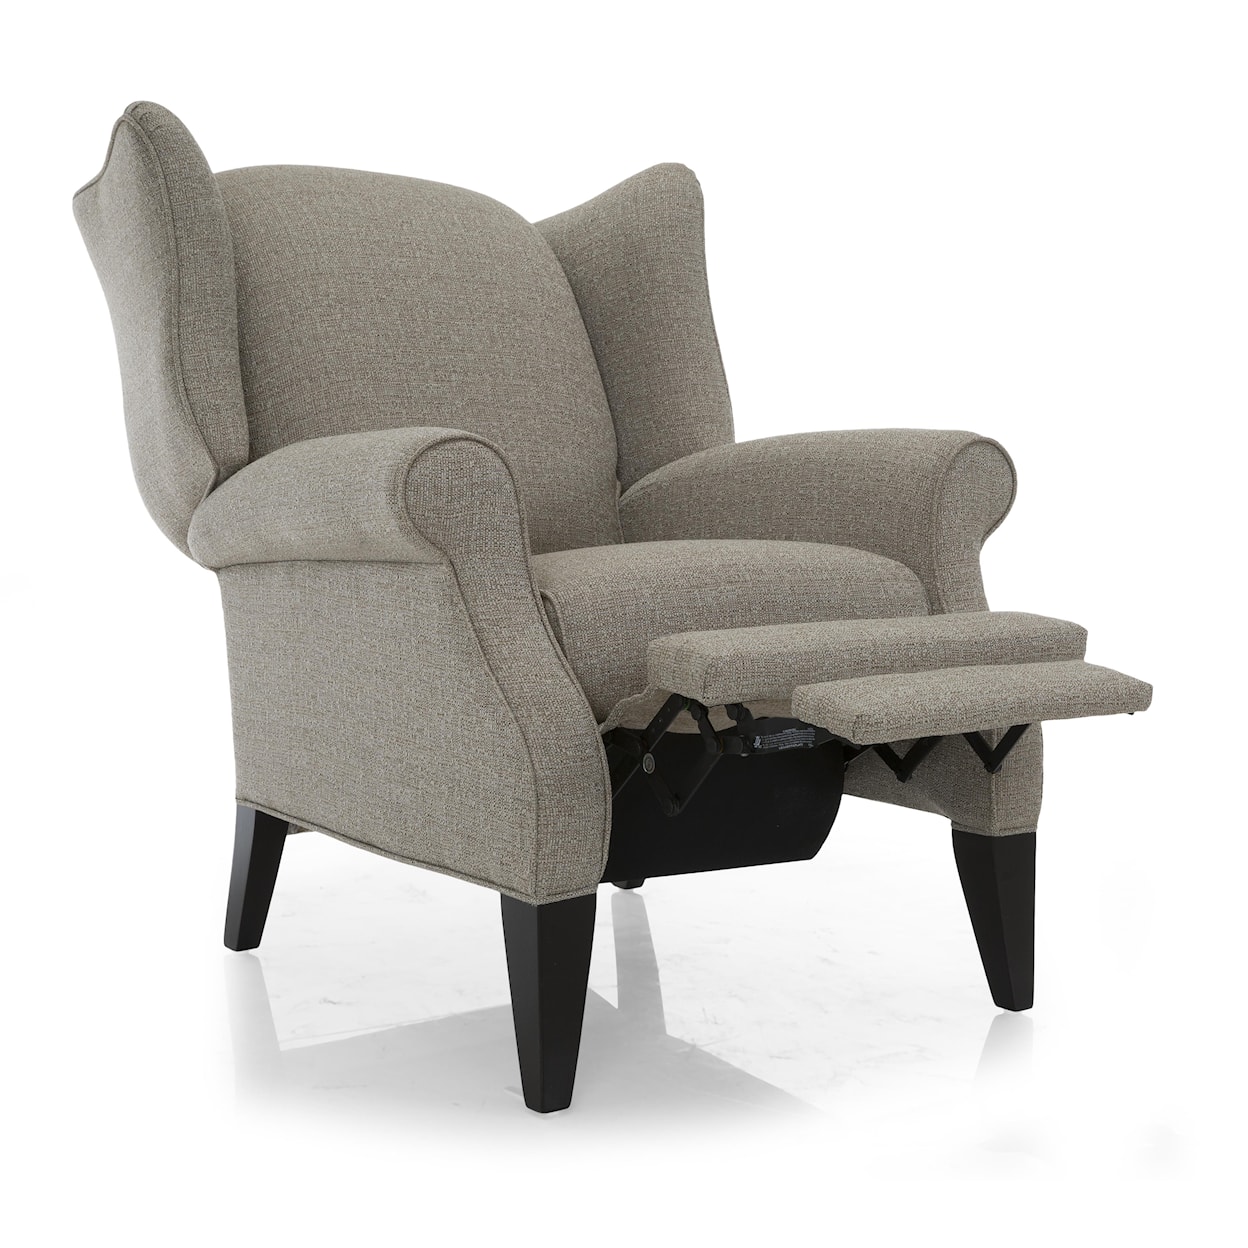 Decor-Rest 2220 Push Back Wing Chair